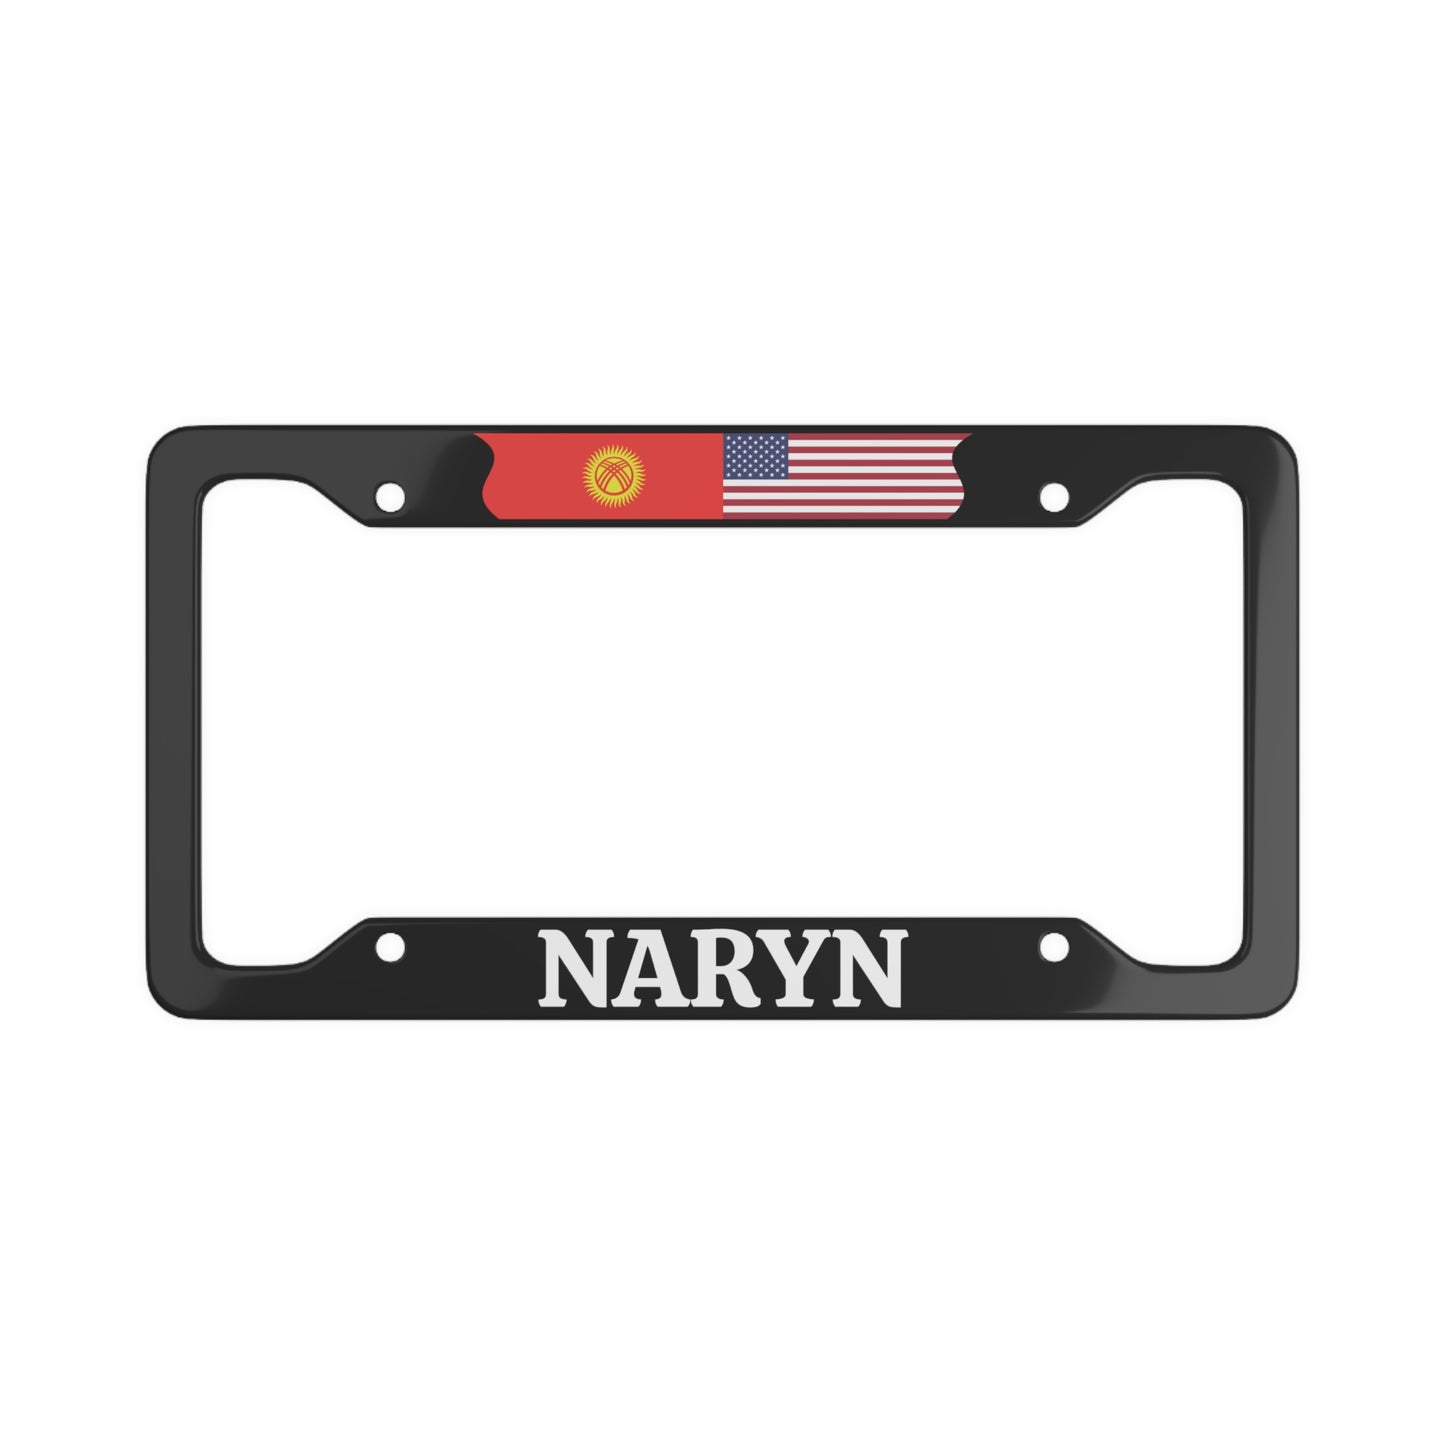 NARYN with flag License Plate Frame